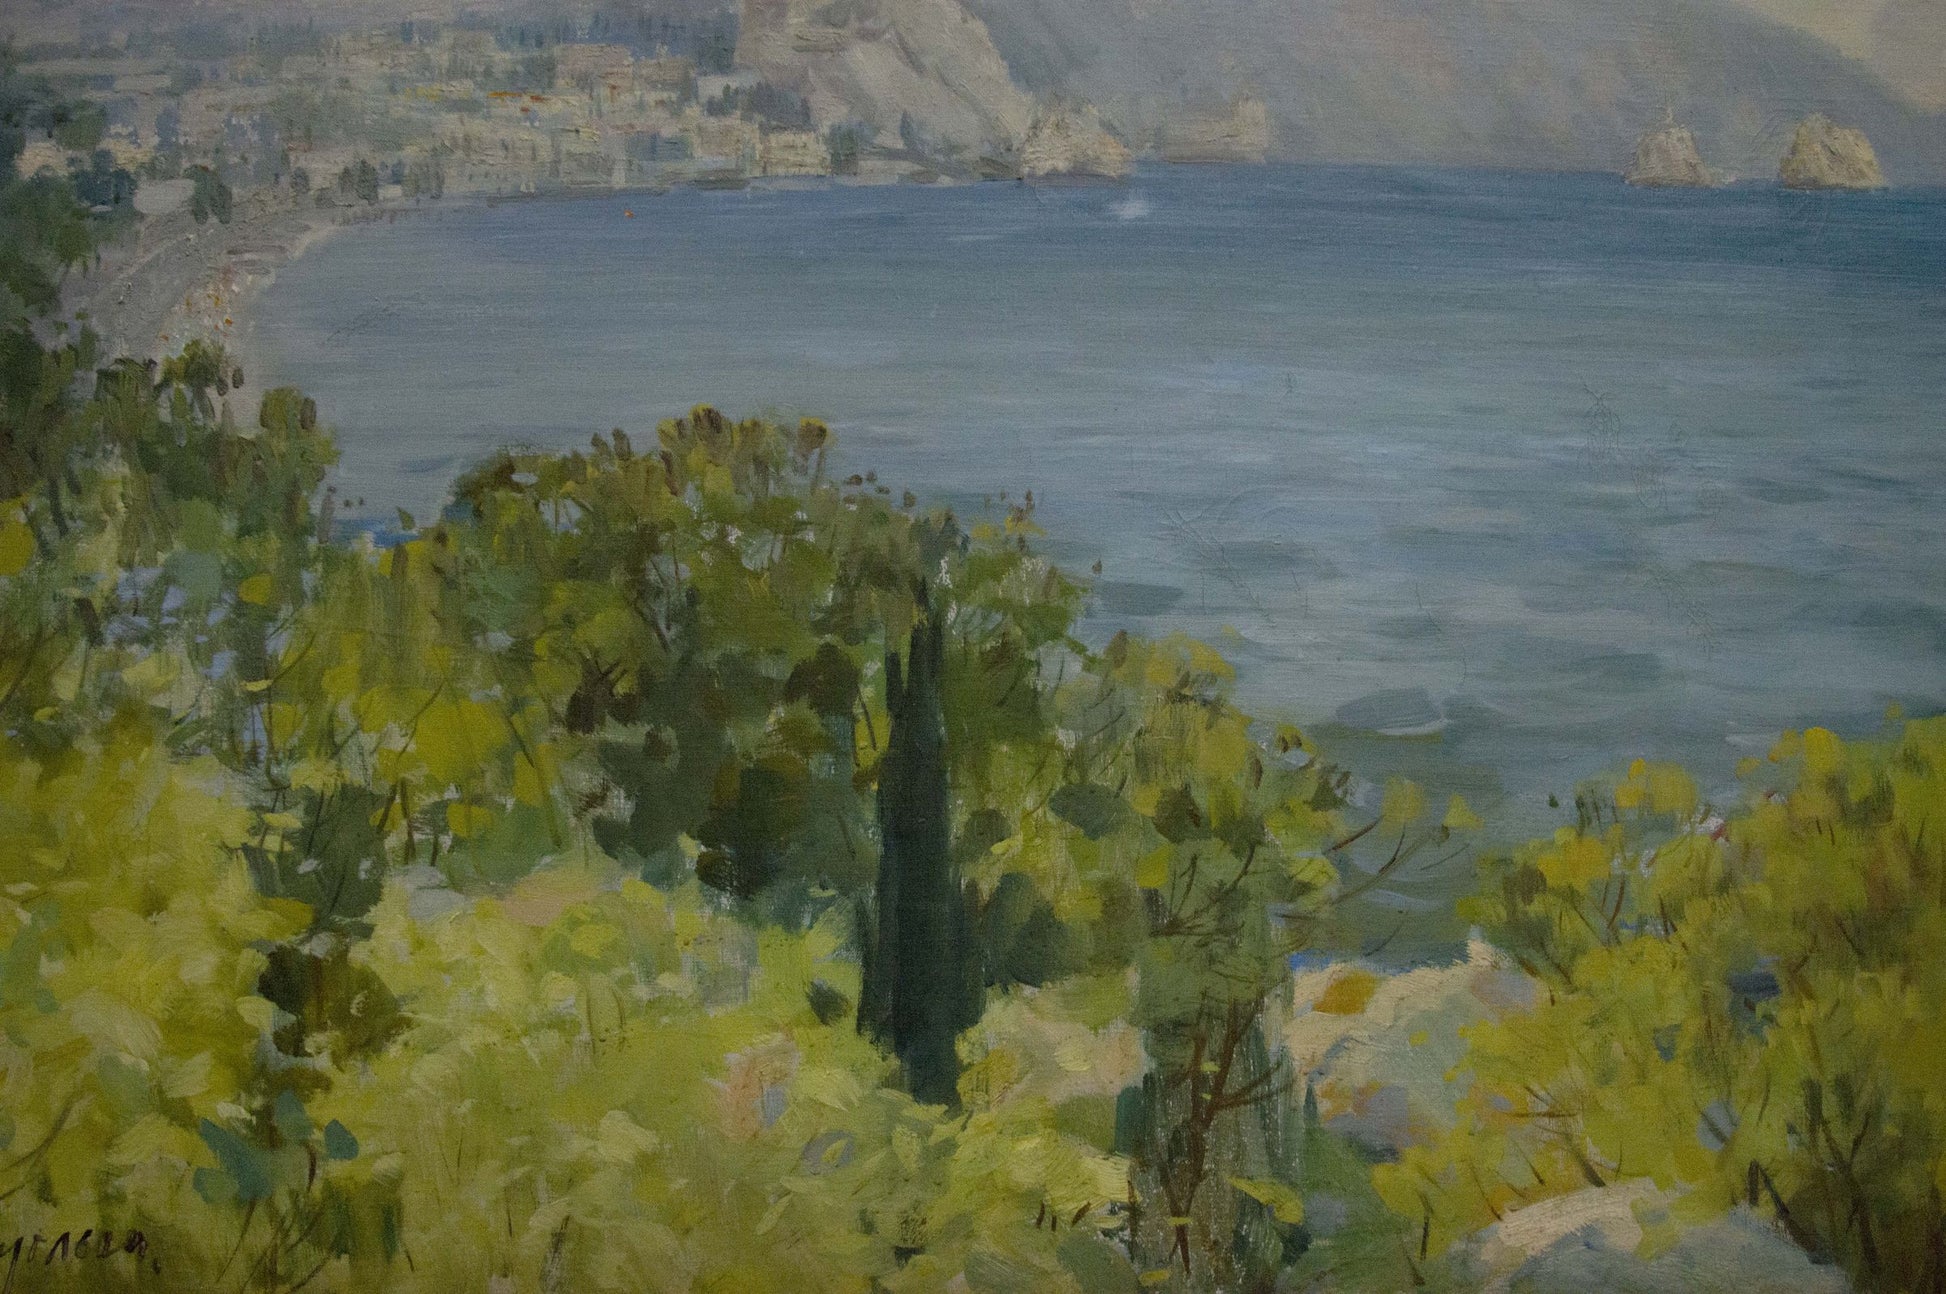 A picturesque portrayal of Yalta through oil painting by Daniil Ivanovich Bezugly